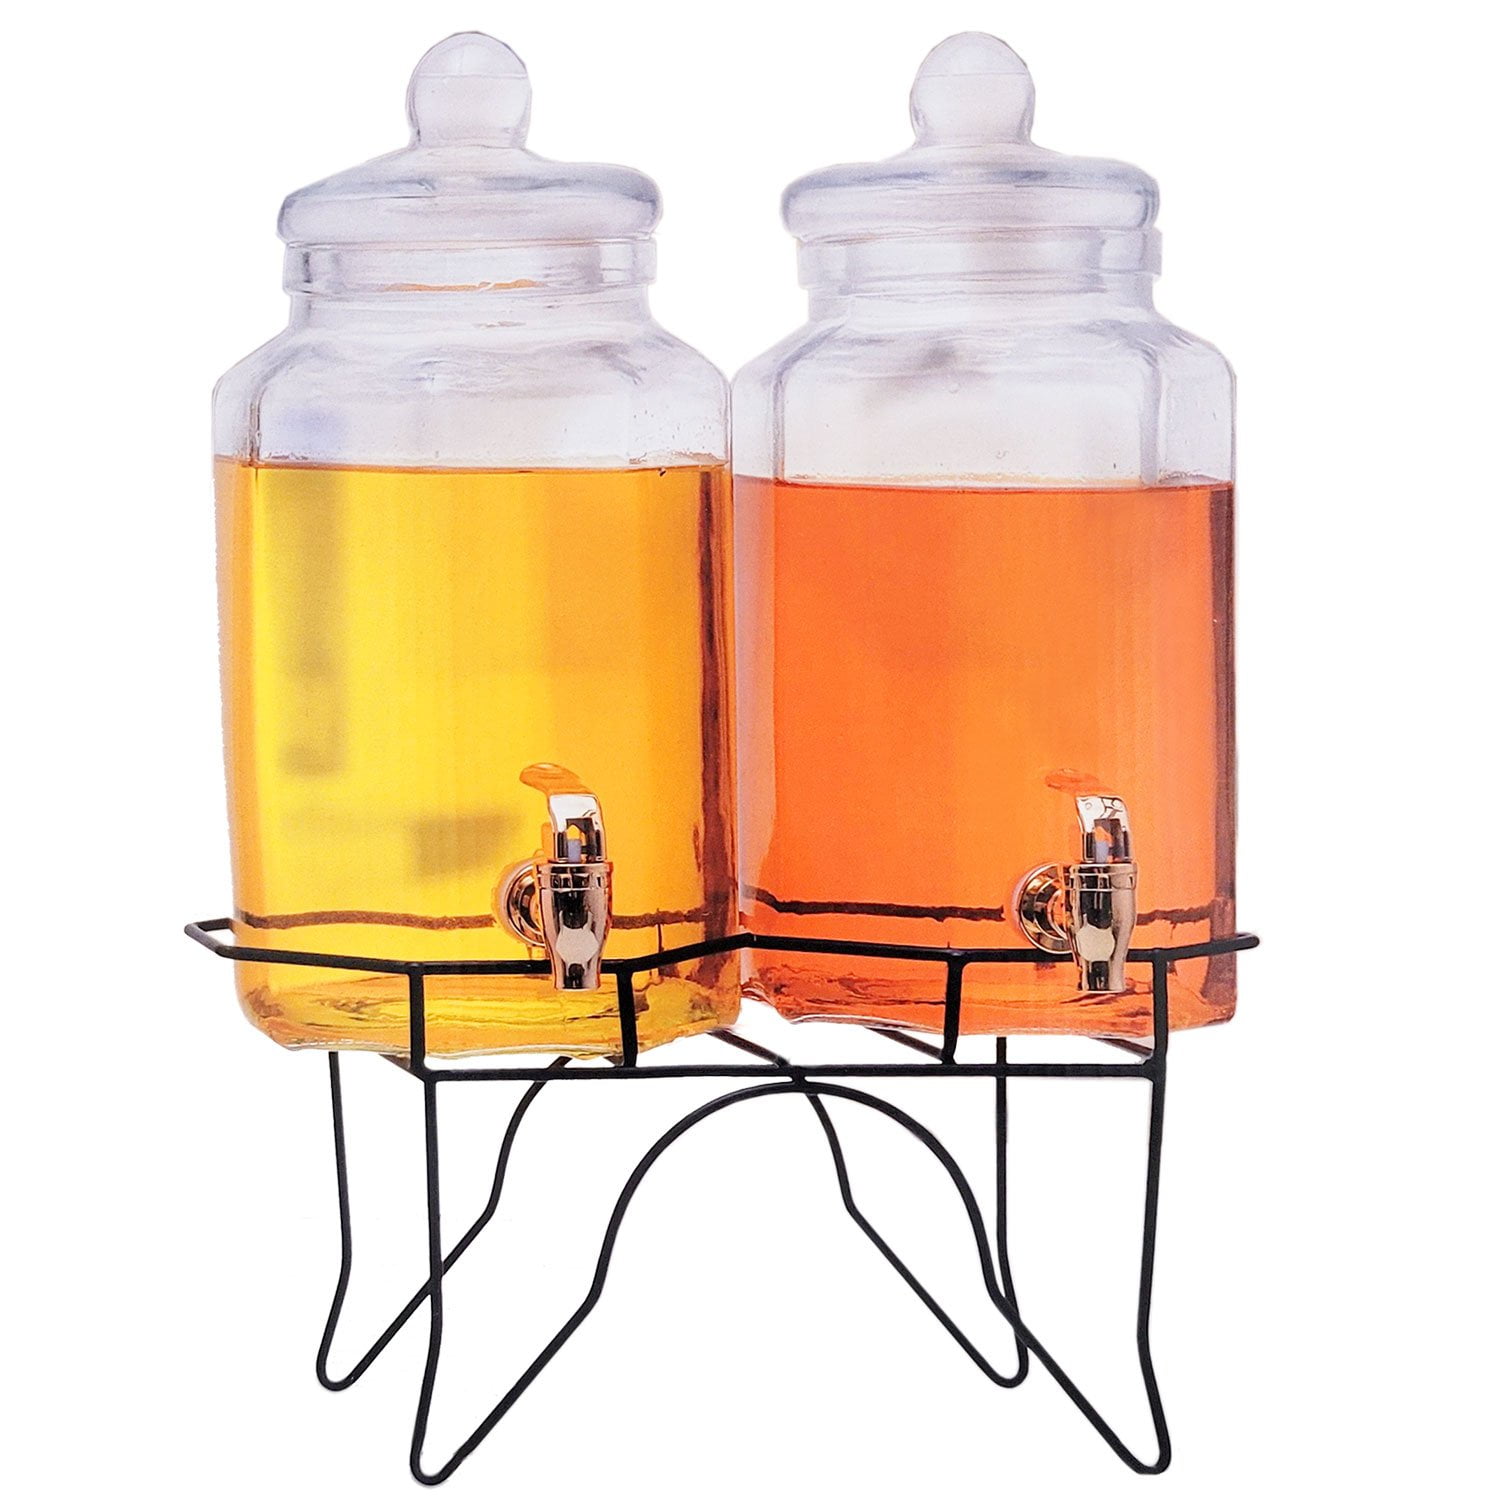 Set of Two Drinks Dispensers with Stand